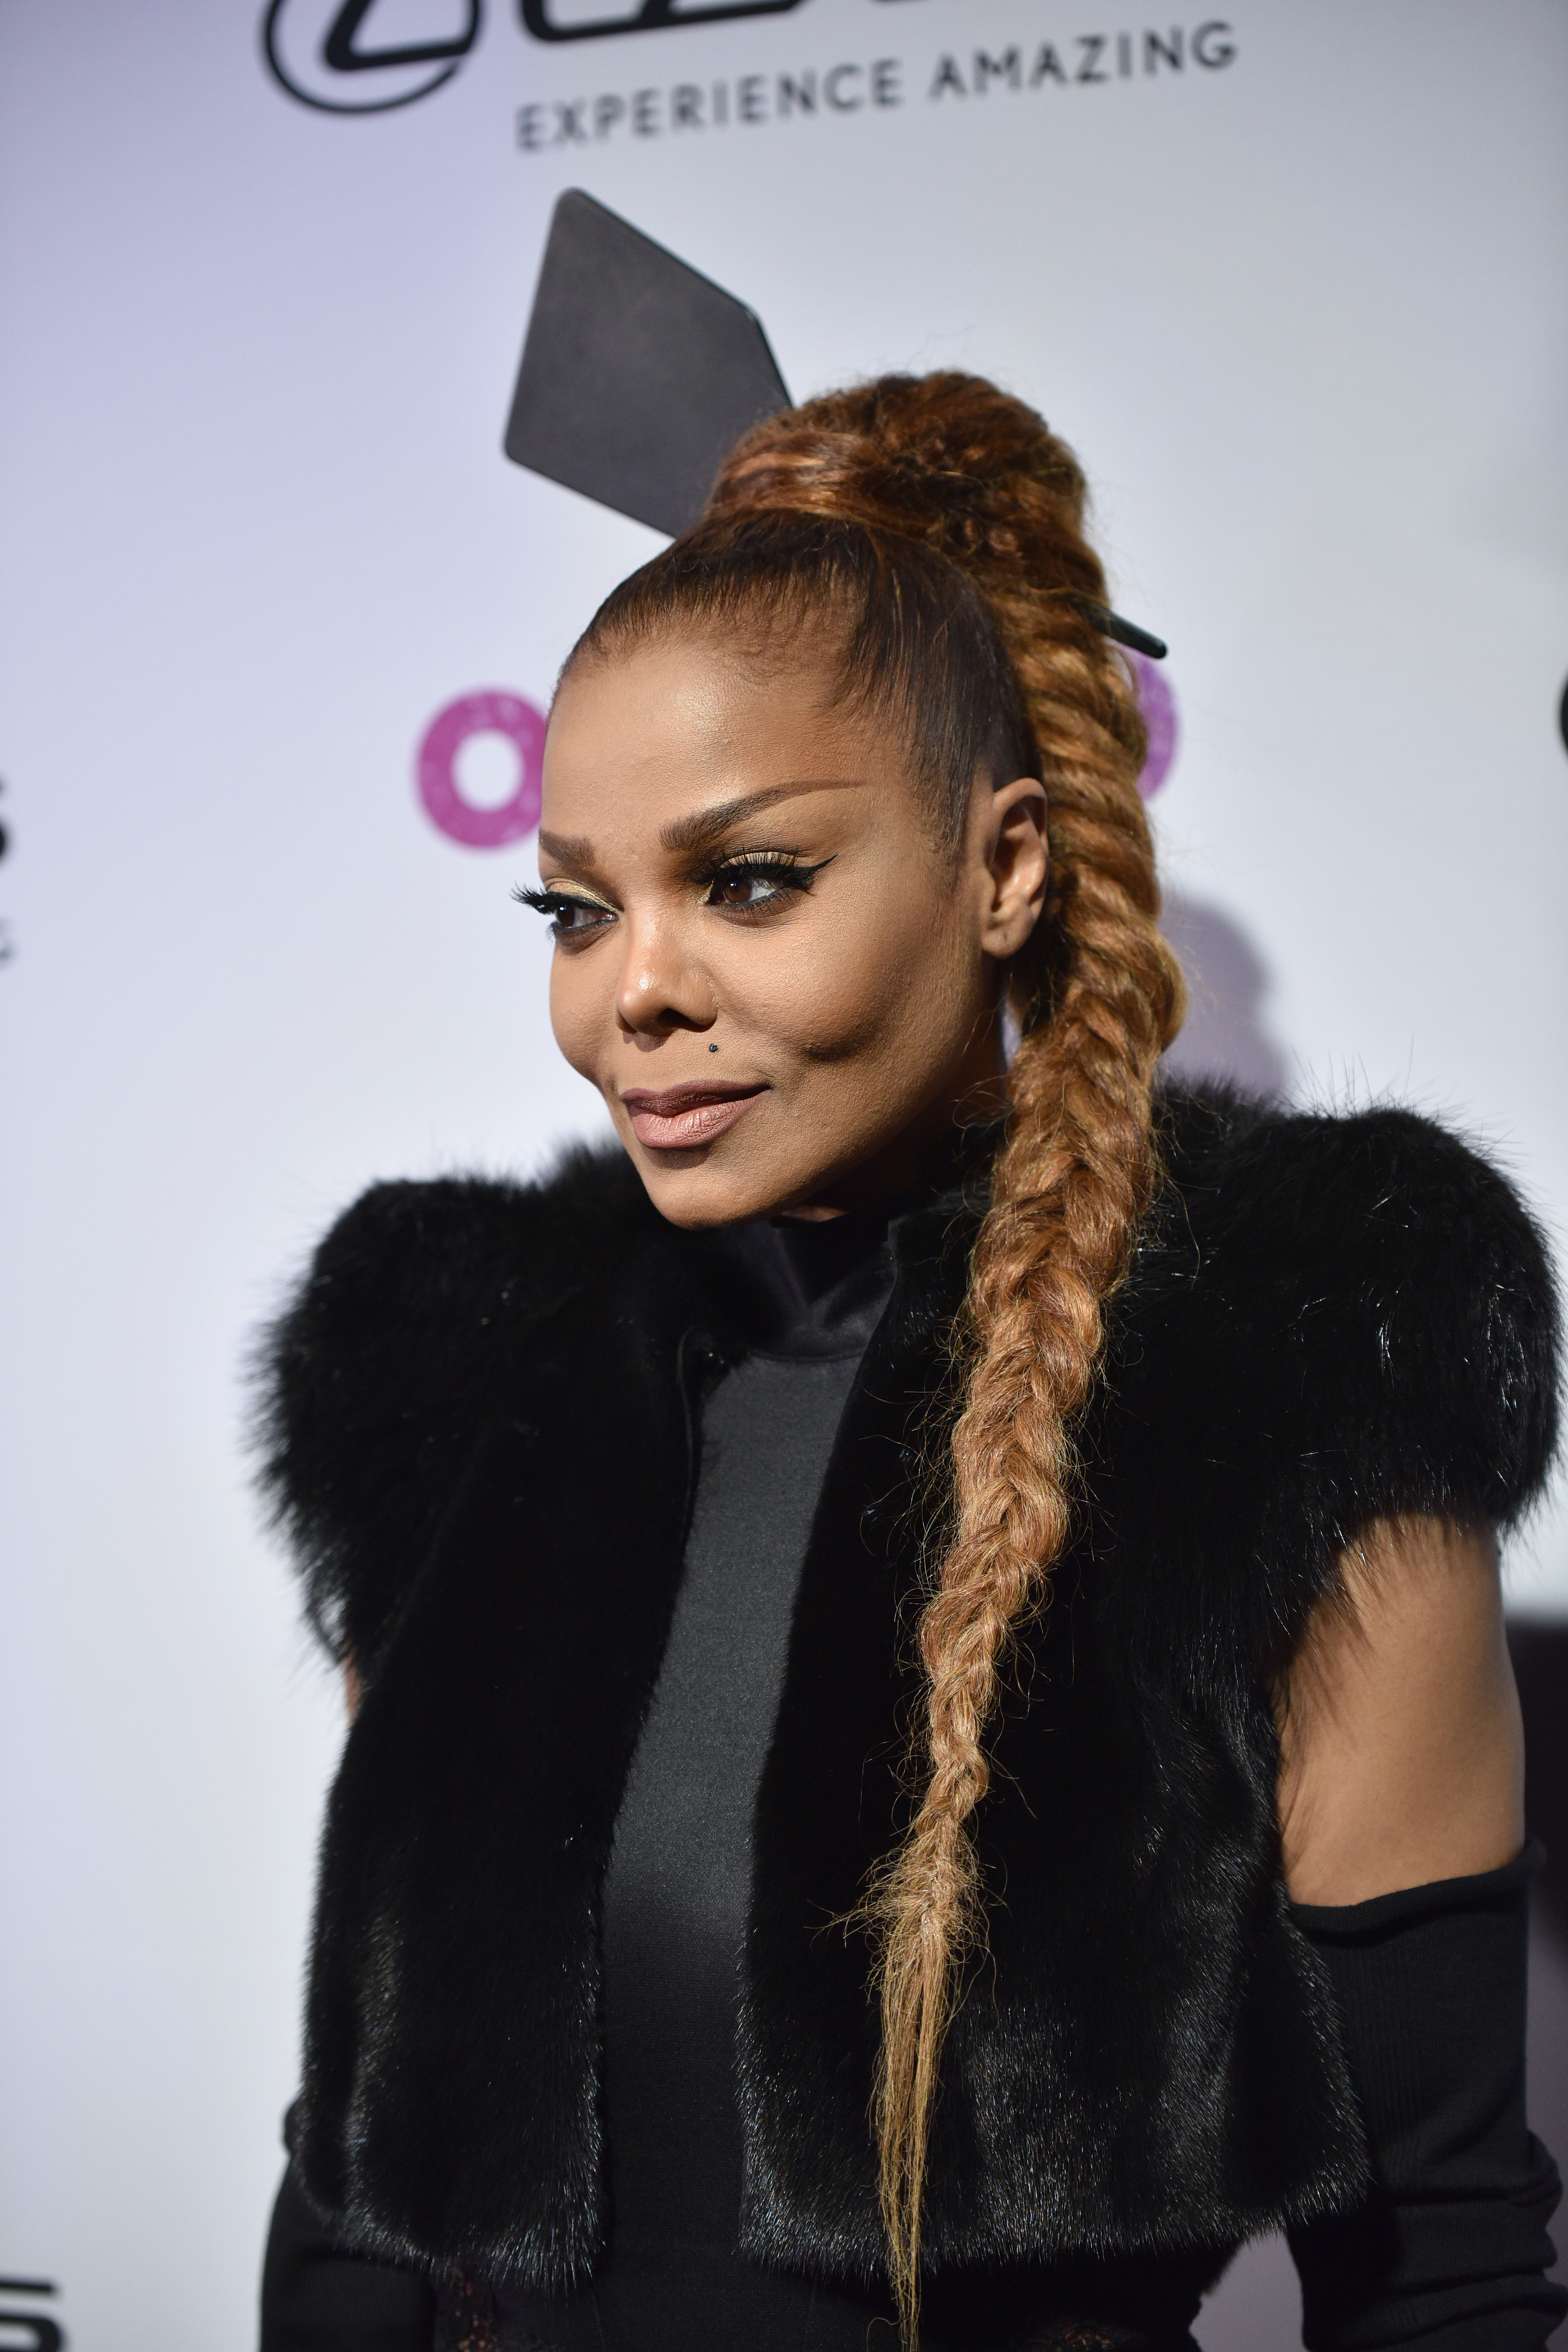 Janet Jackson attends OUT Magazine #OUT100 event at the the Altman Building on November 9, 2017 in New York City. | Source: Getty Images